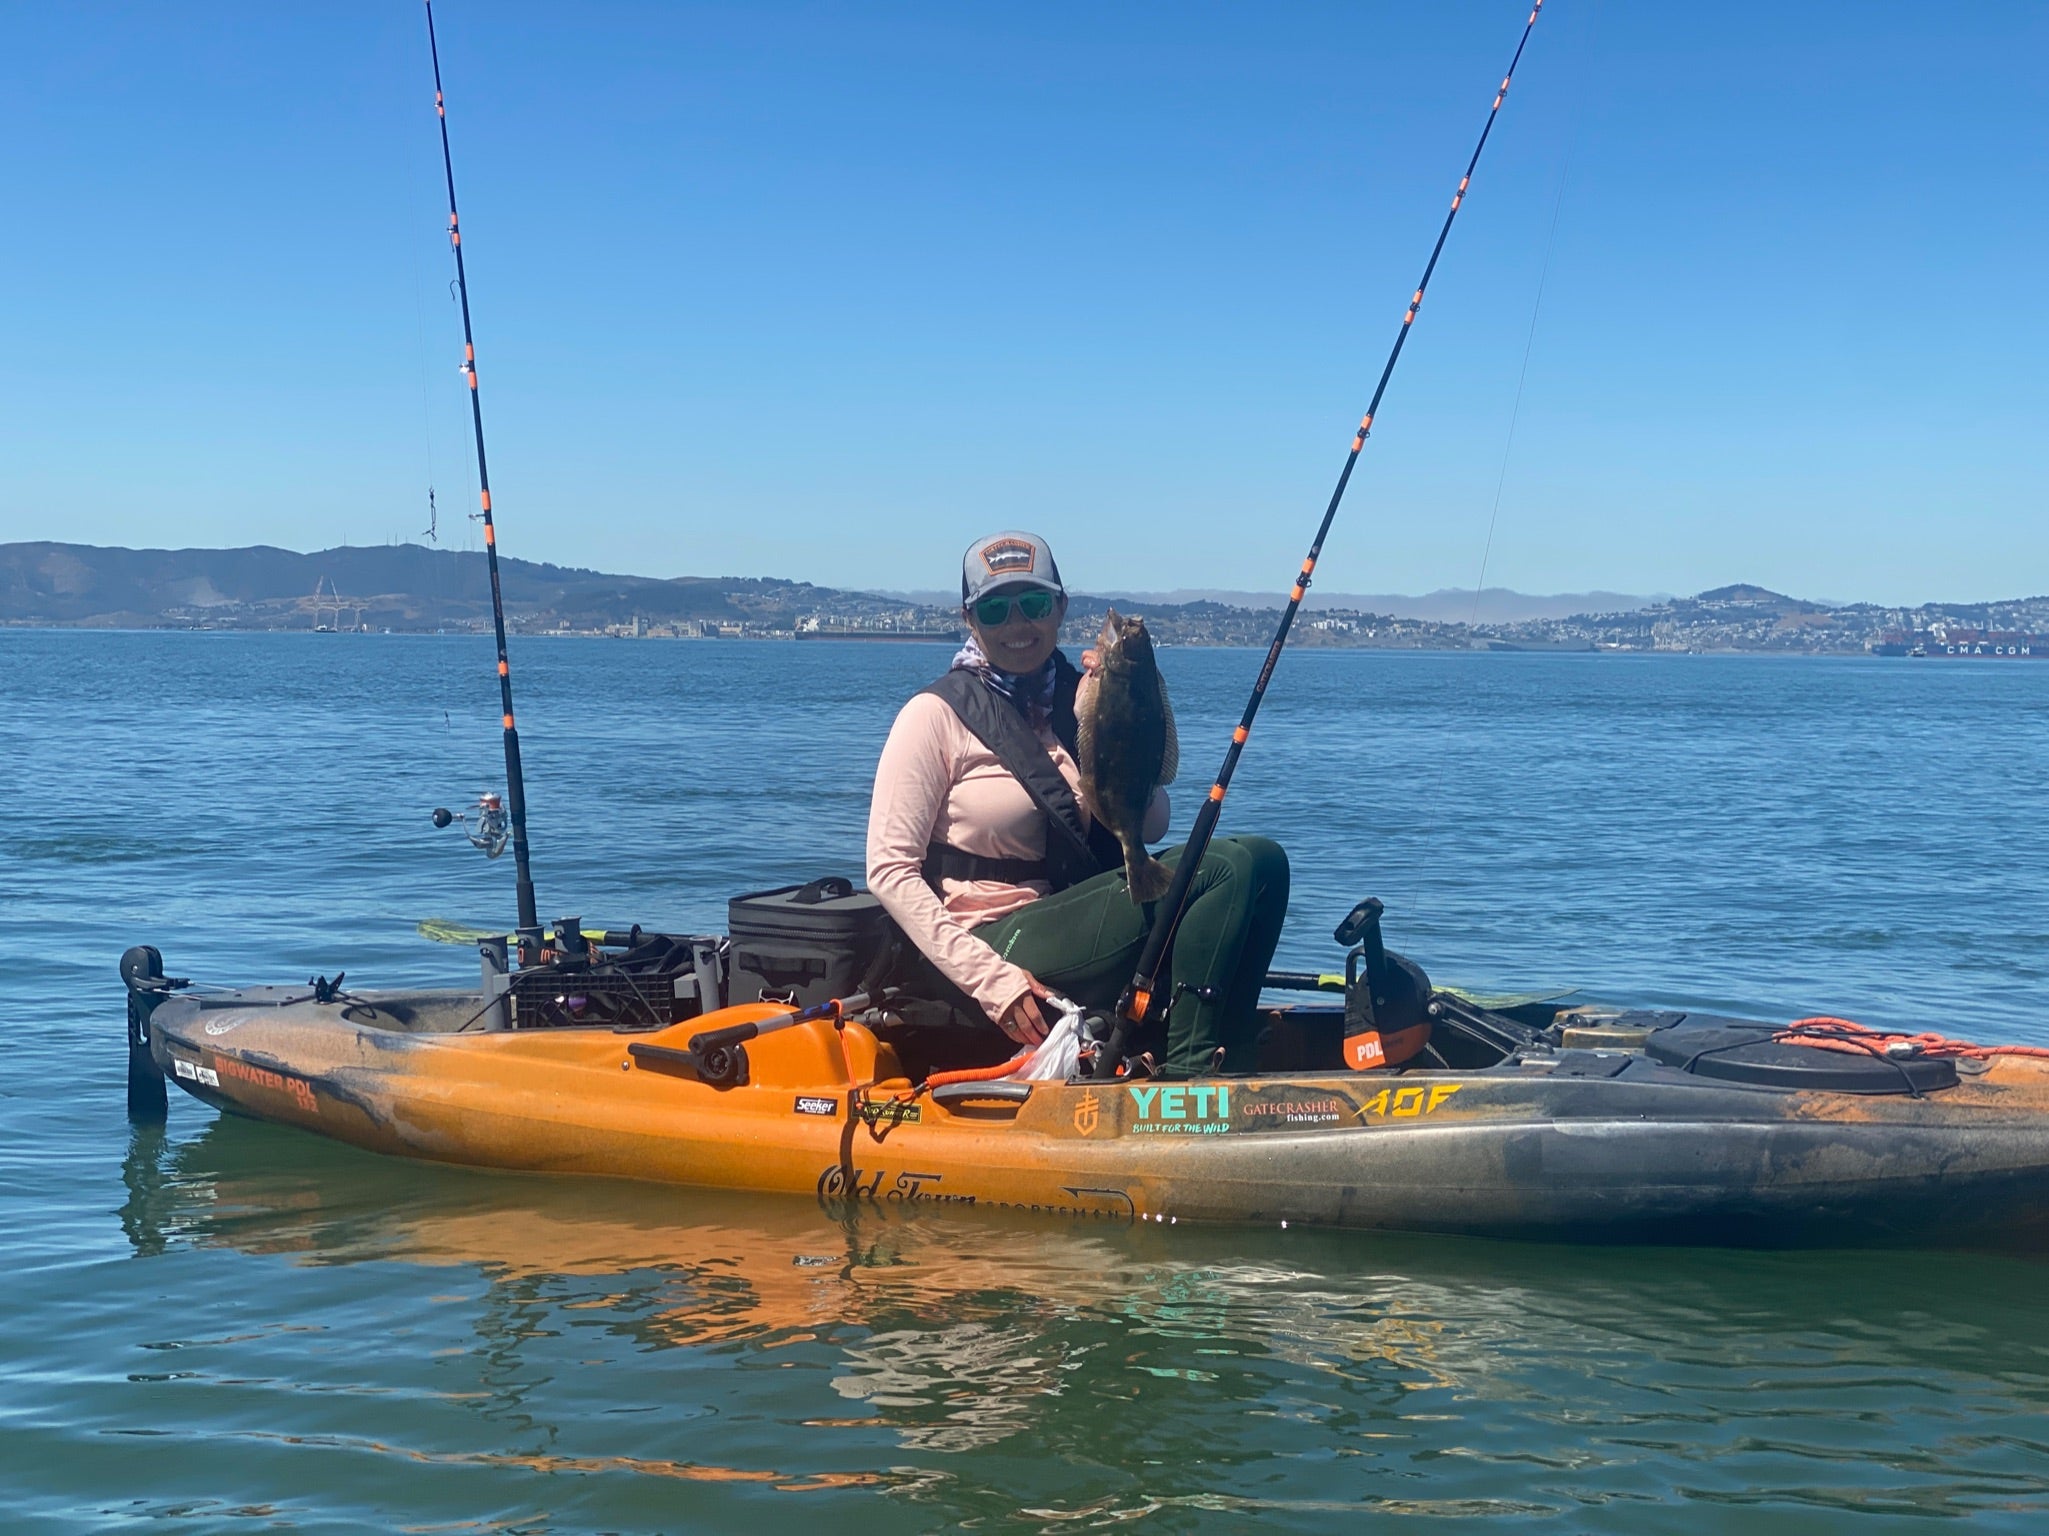 the fisherman holds the halibut from the kayak